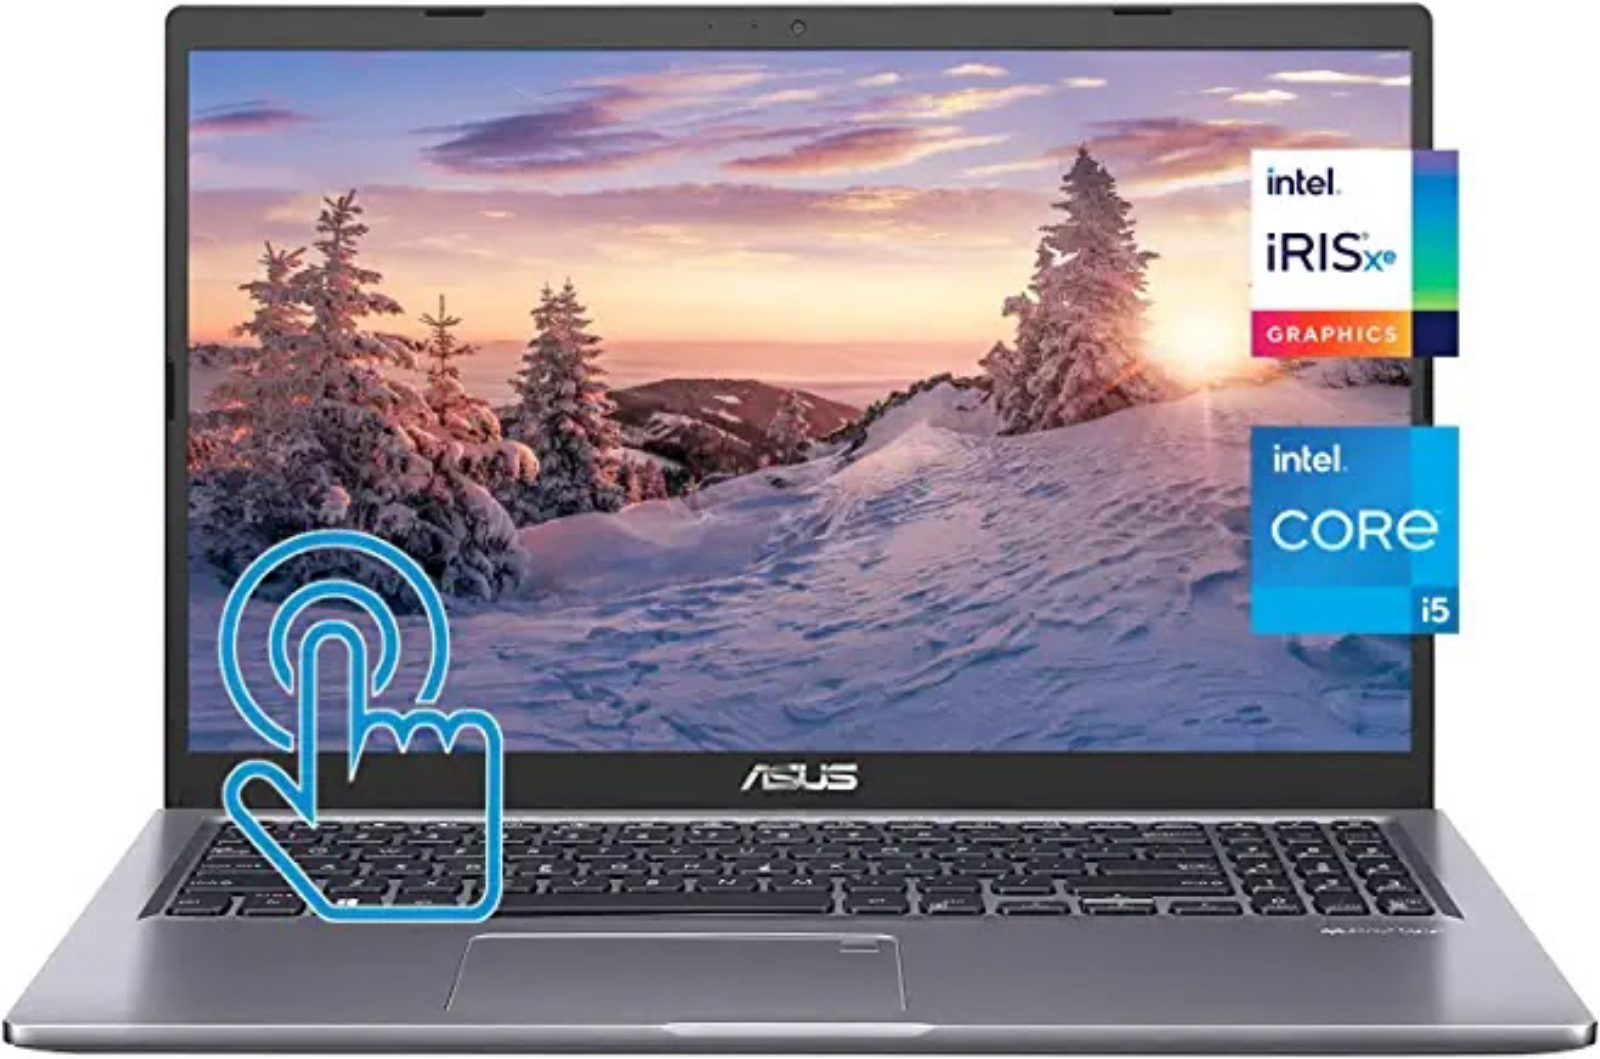 How to Screenshot on ASUS Laptop